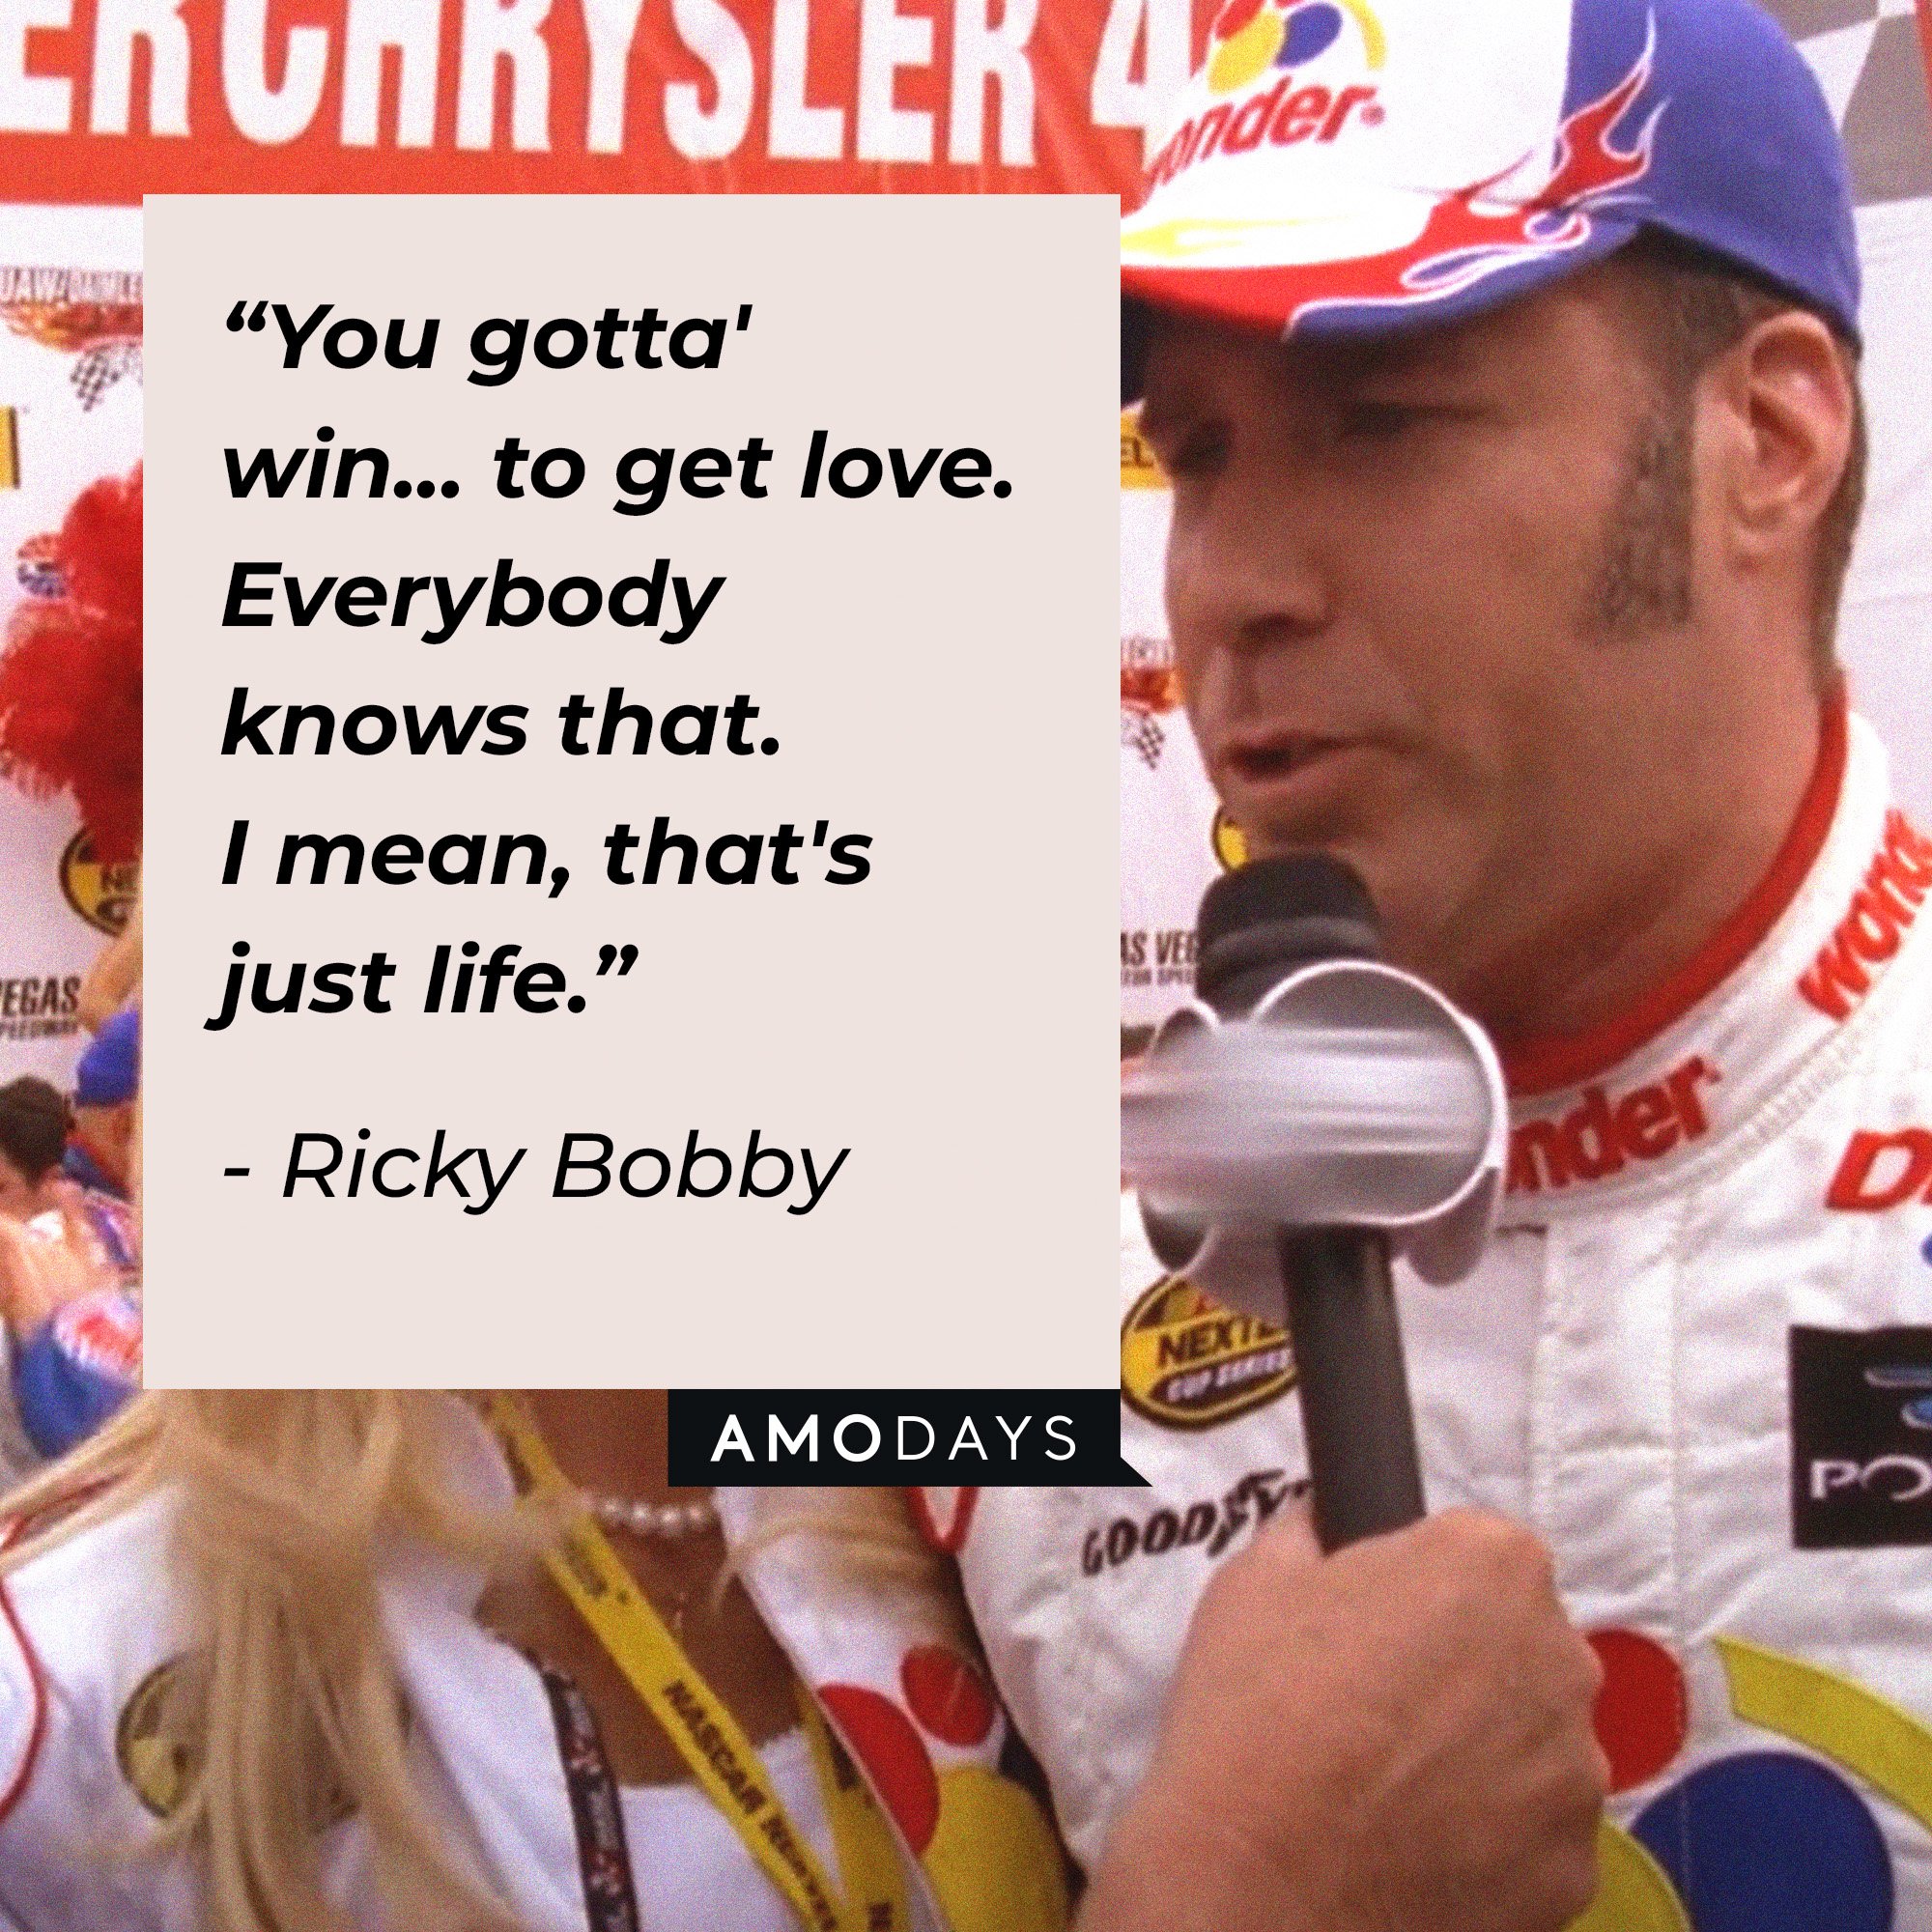 Ricky Bobby’s quote: “You gotta' win... to get love. Everybody knows that. I mean, that's just life.”  | Image: AmoDays